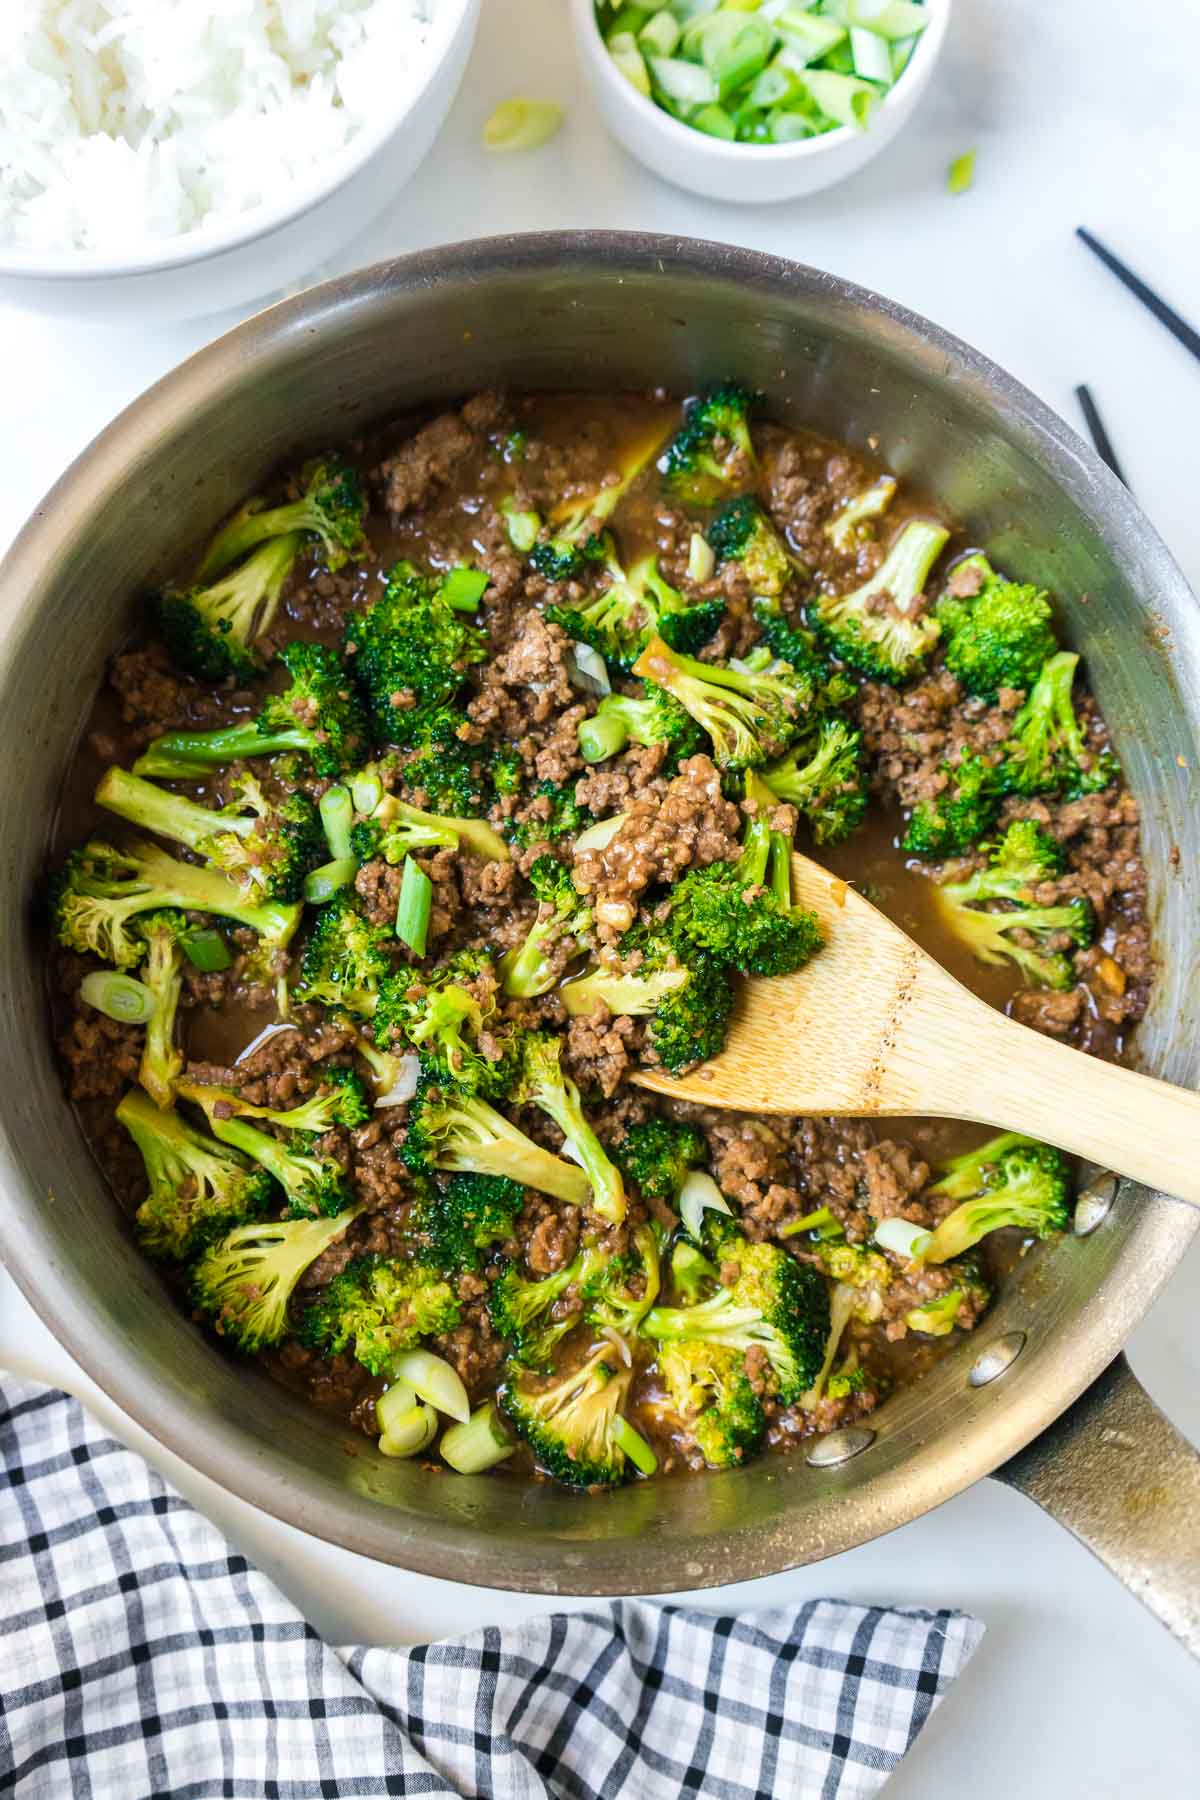 A pan of ground beef and broccoli with a wooden spoon.